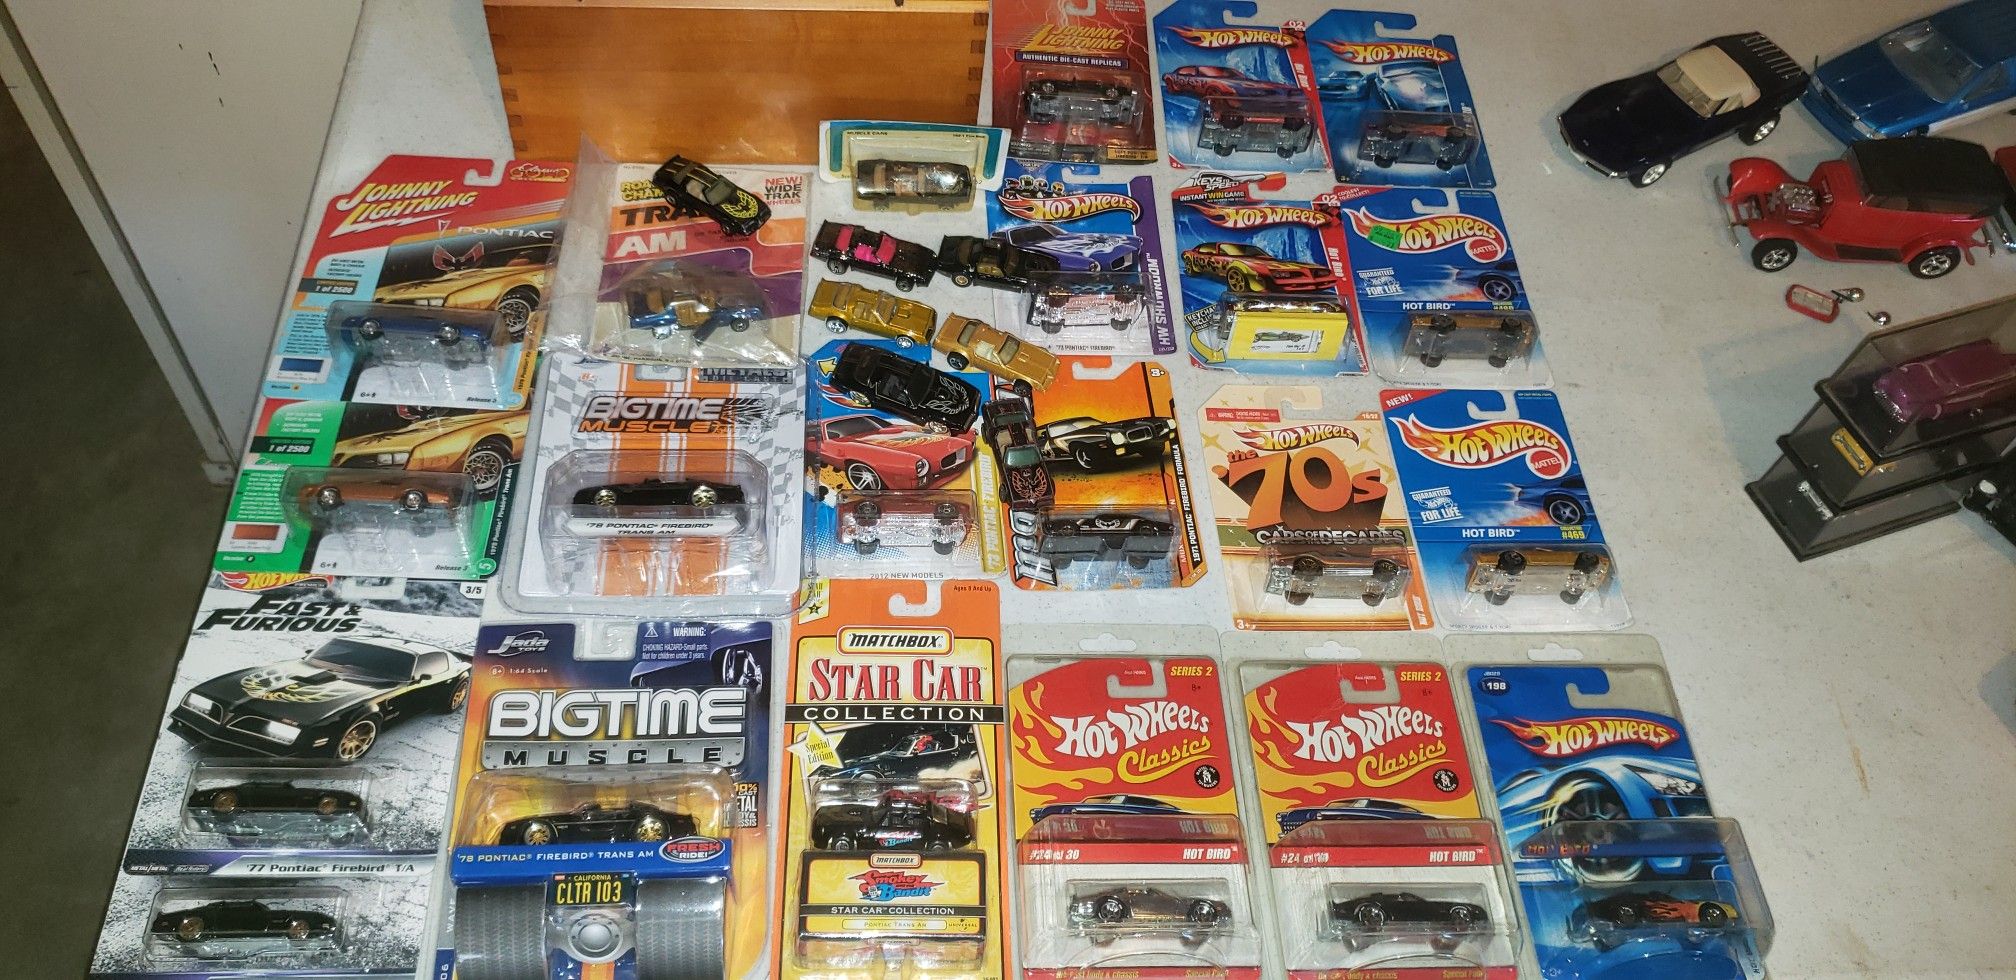 Trans am collection